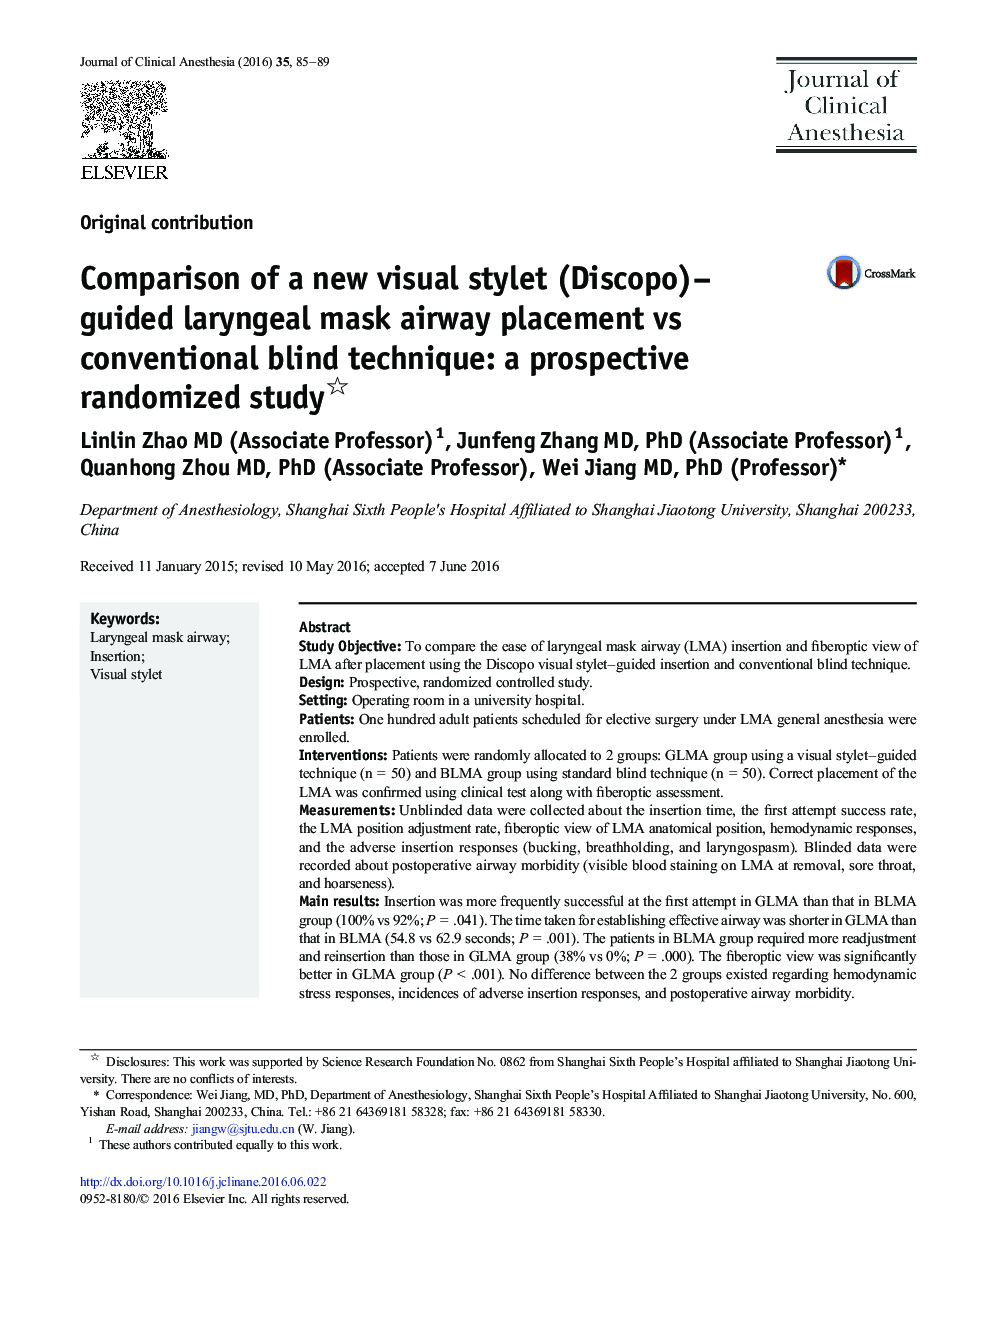 Comparison of a new visual stylet (Discopo)-guided laryngeal mask airway placement vs conventional blind technique: a prospective randomized study